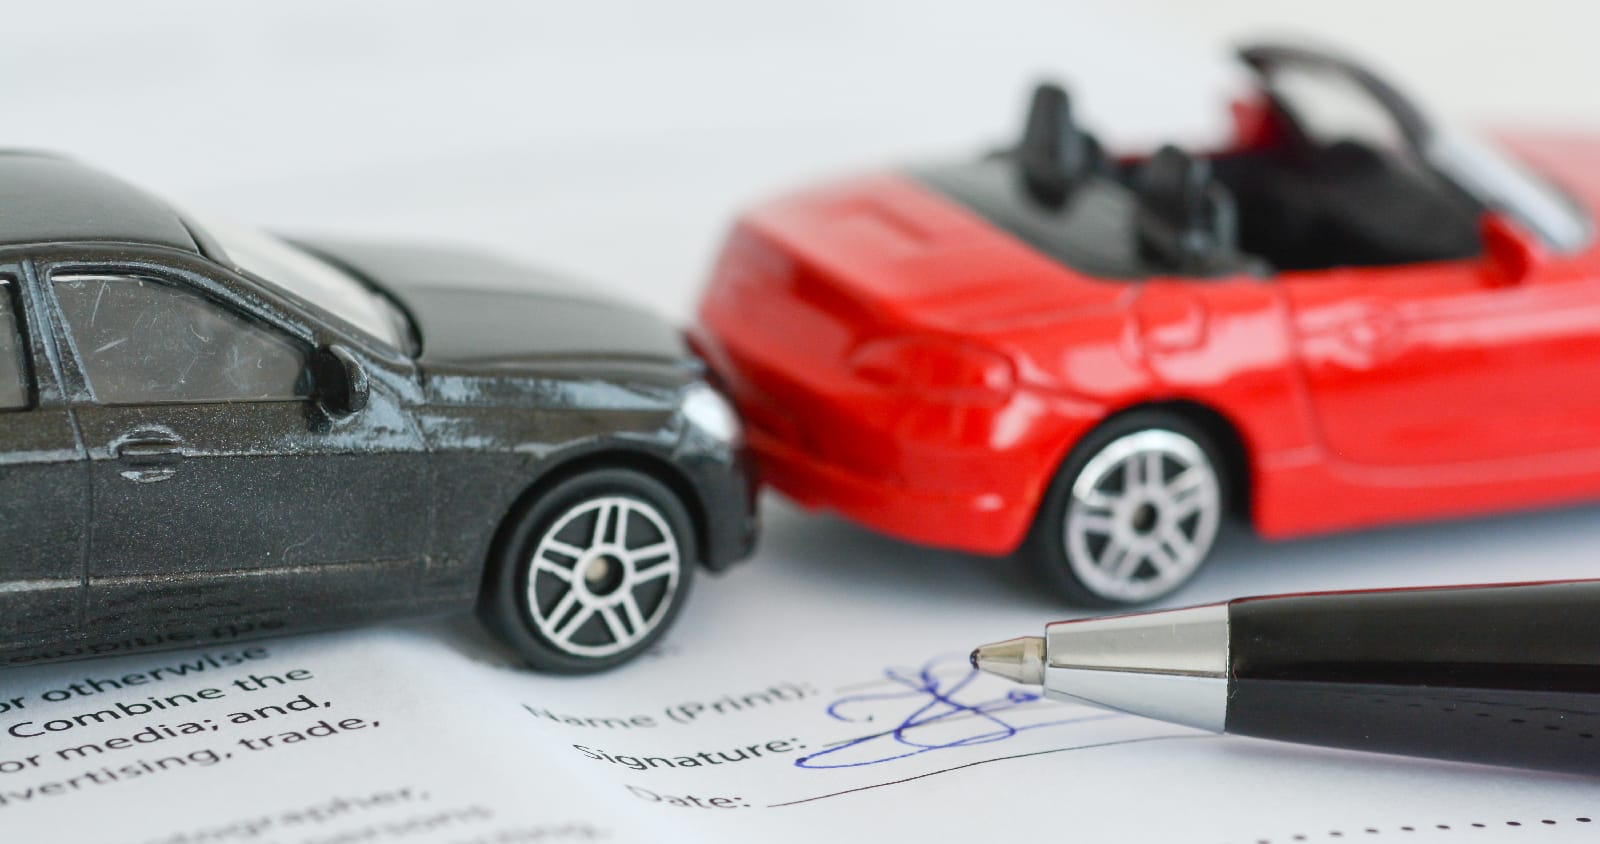 toy cars in a fender bender with a car insurance document below